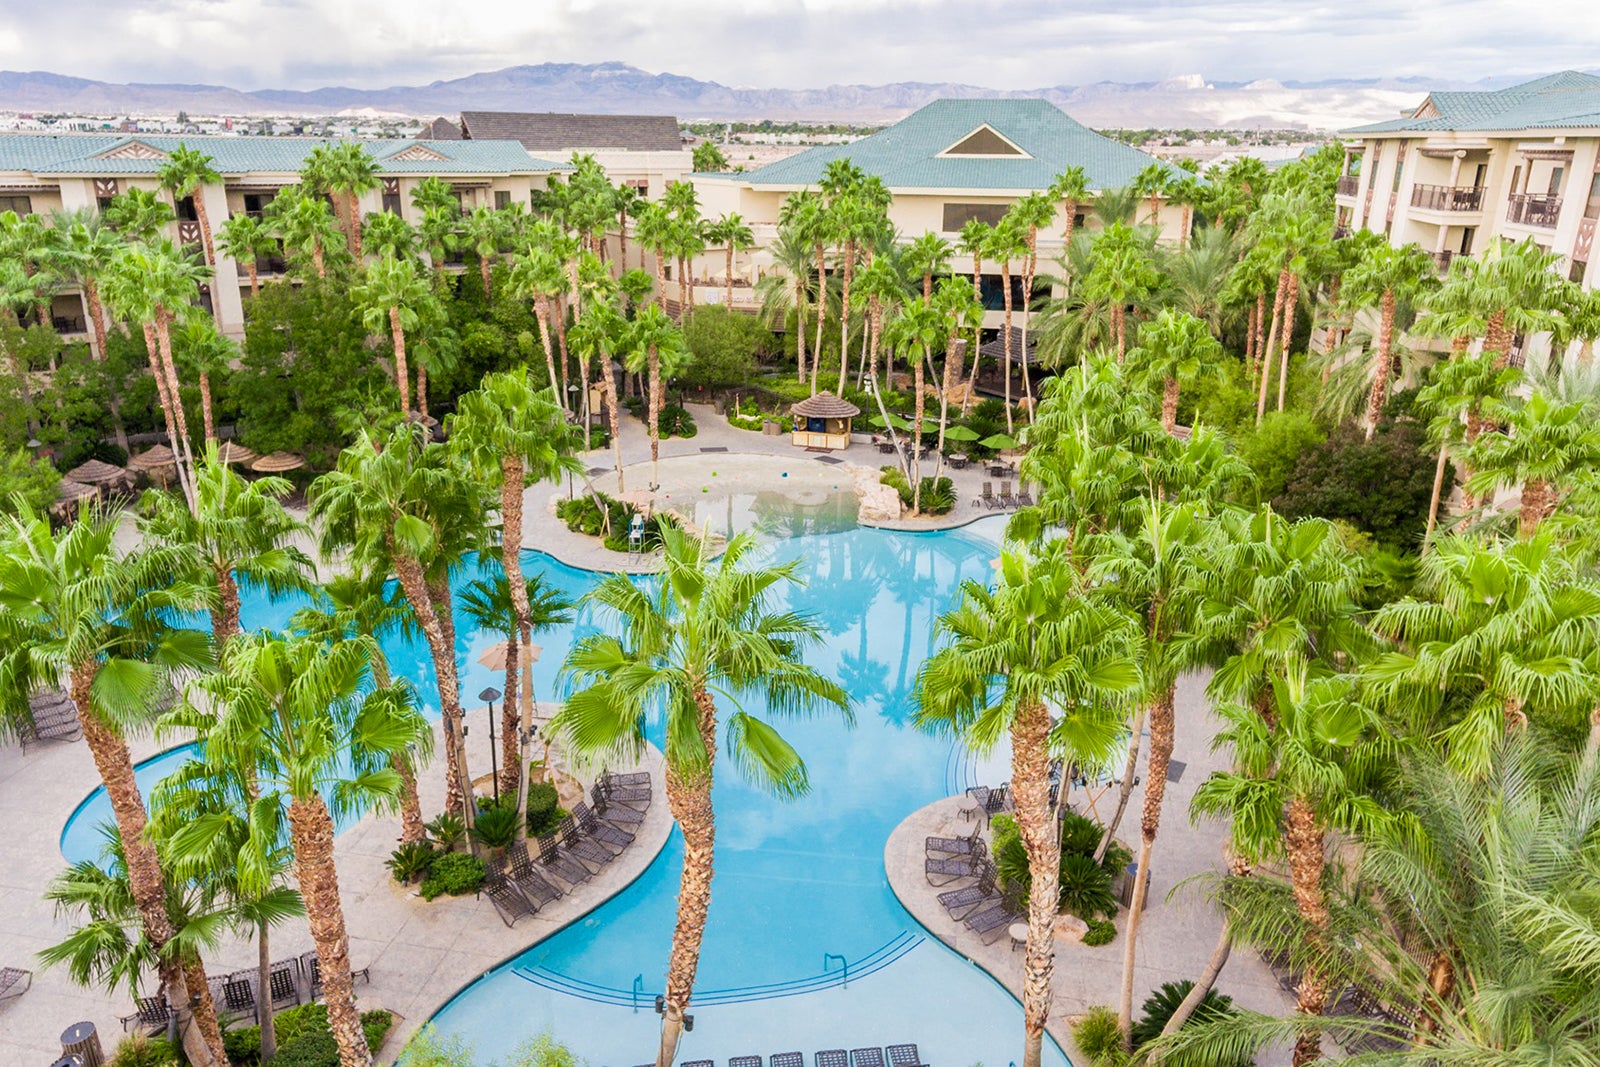 The 10 Best Las Vegas Pools to Suit Your Style - In The Loop Travel